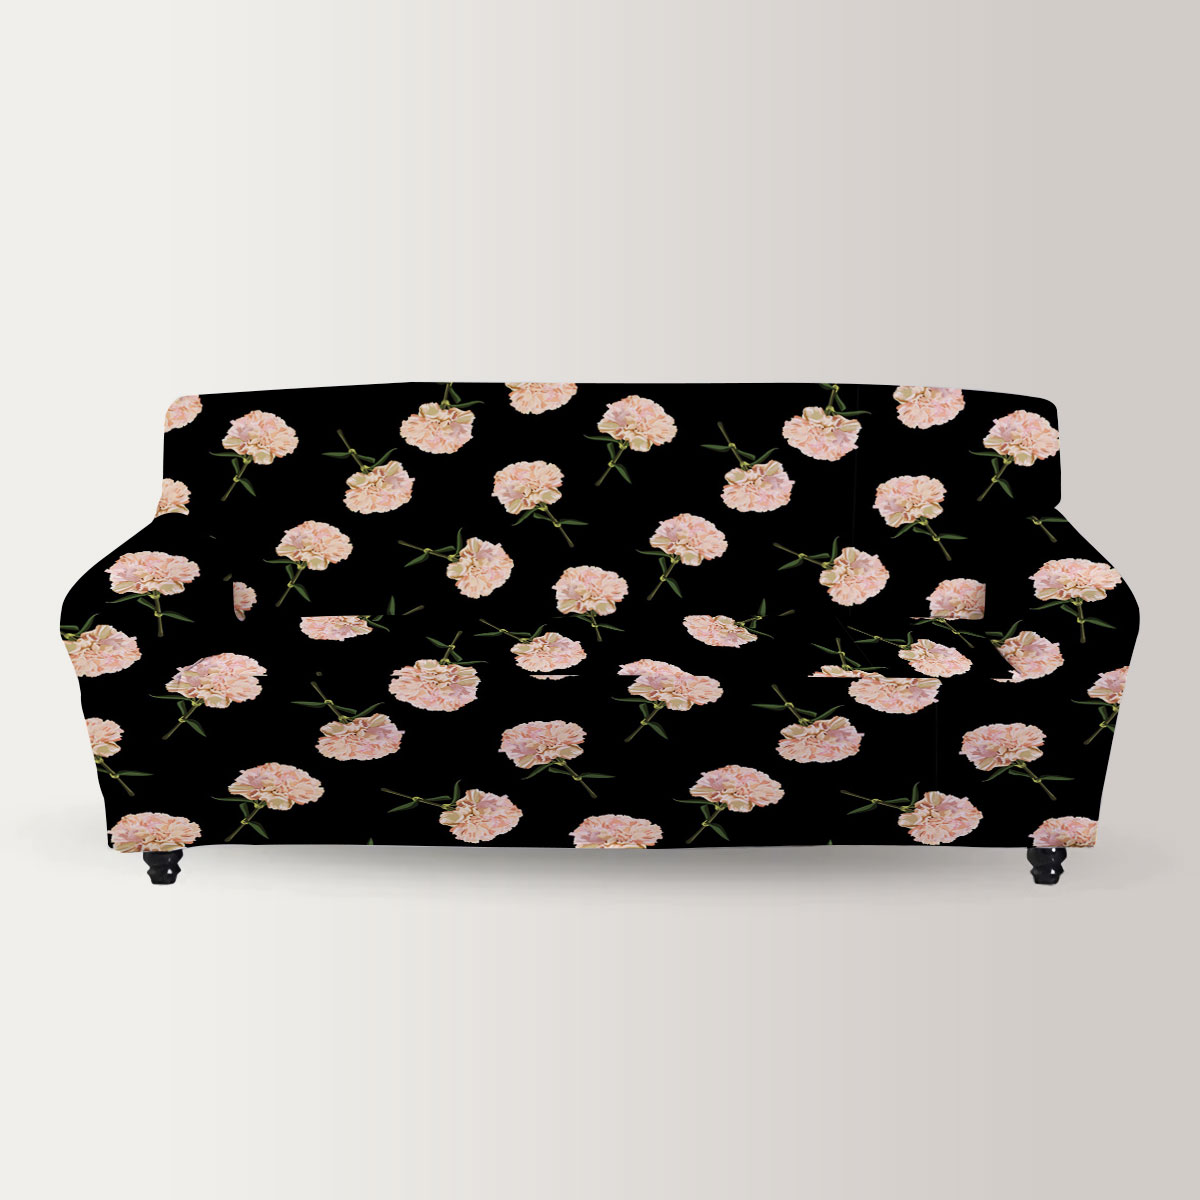 Light Pink Carnations Sofa Cover